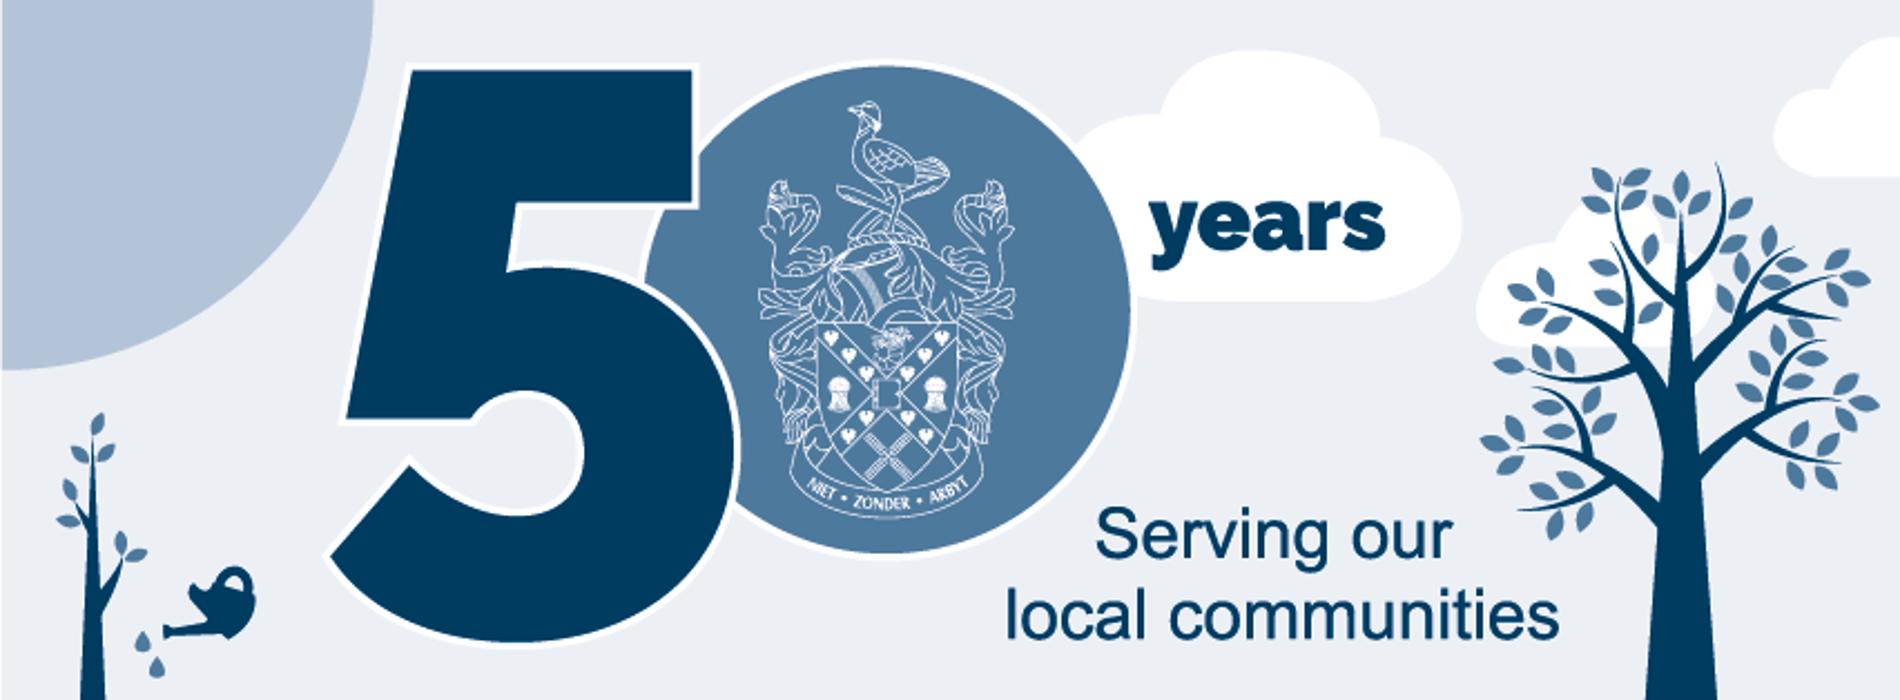 Celebrating 50 years of South Cambridgeshire District Council